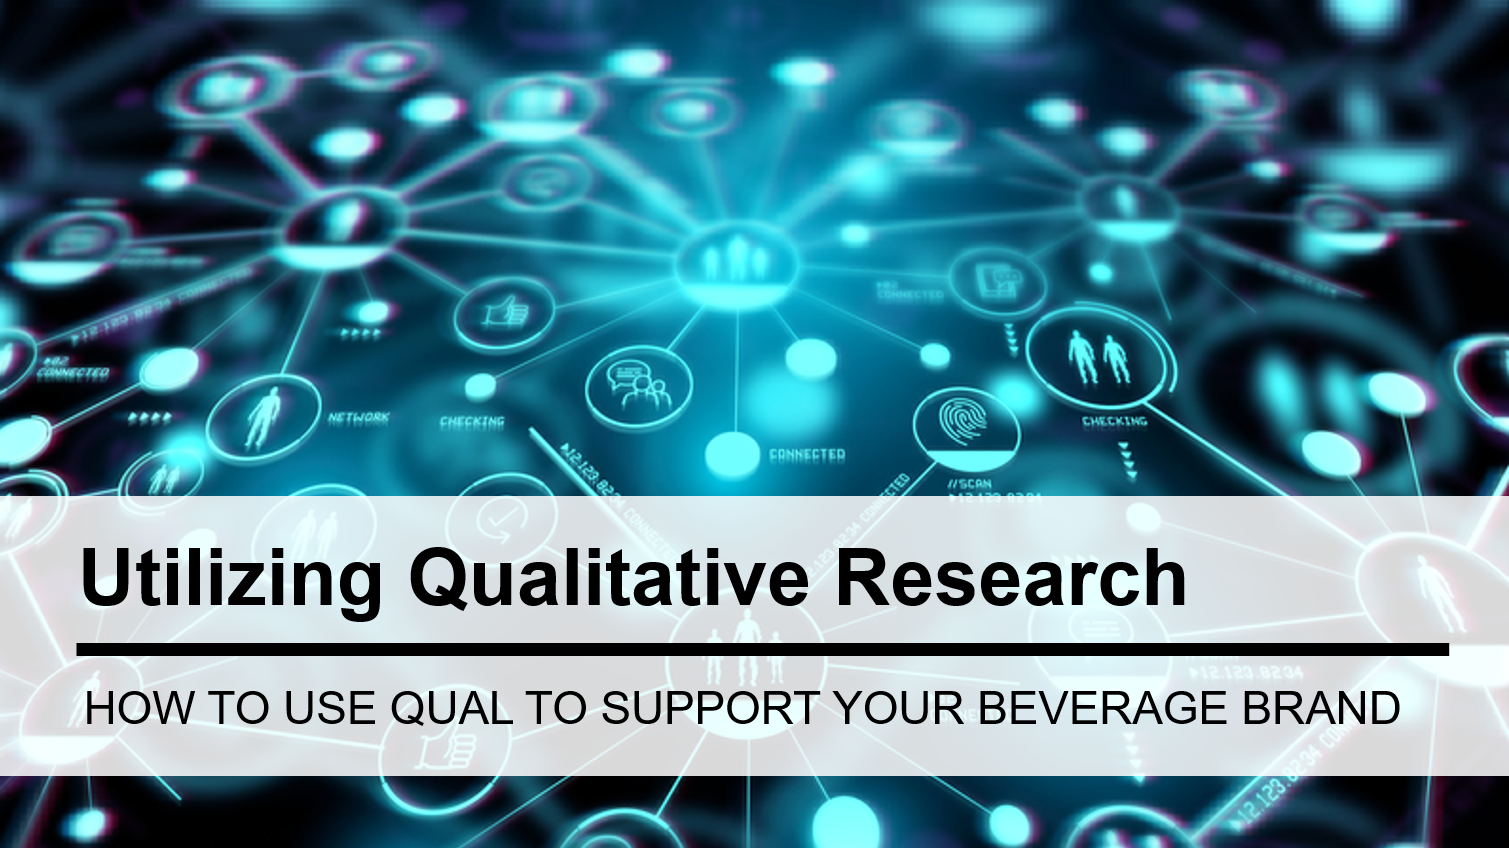 How to Use Qualitative Research to Support Your Beverage Brand